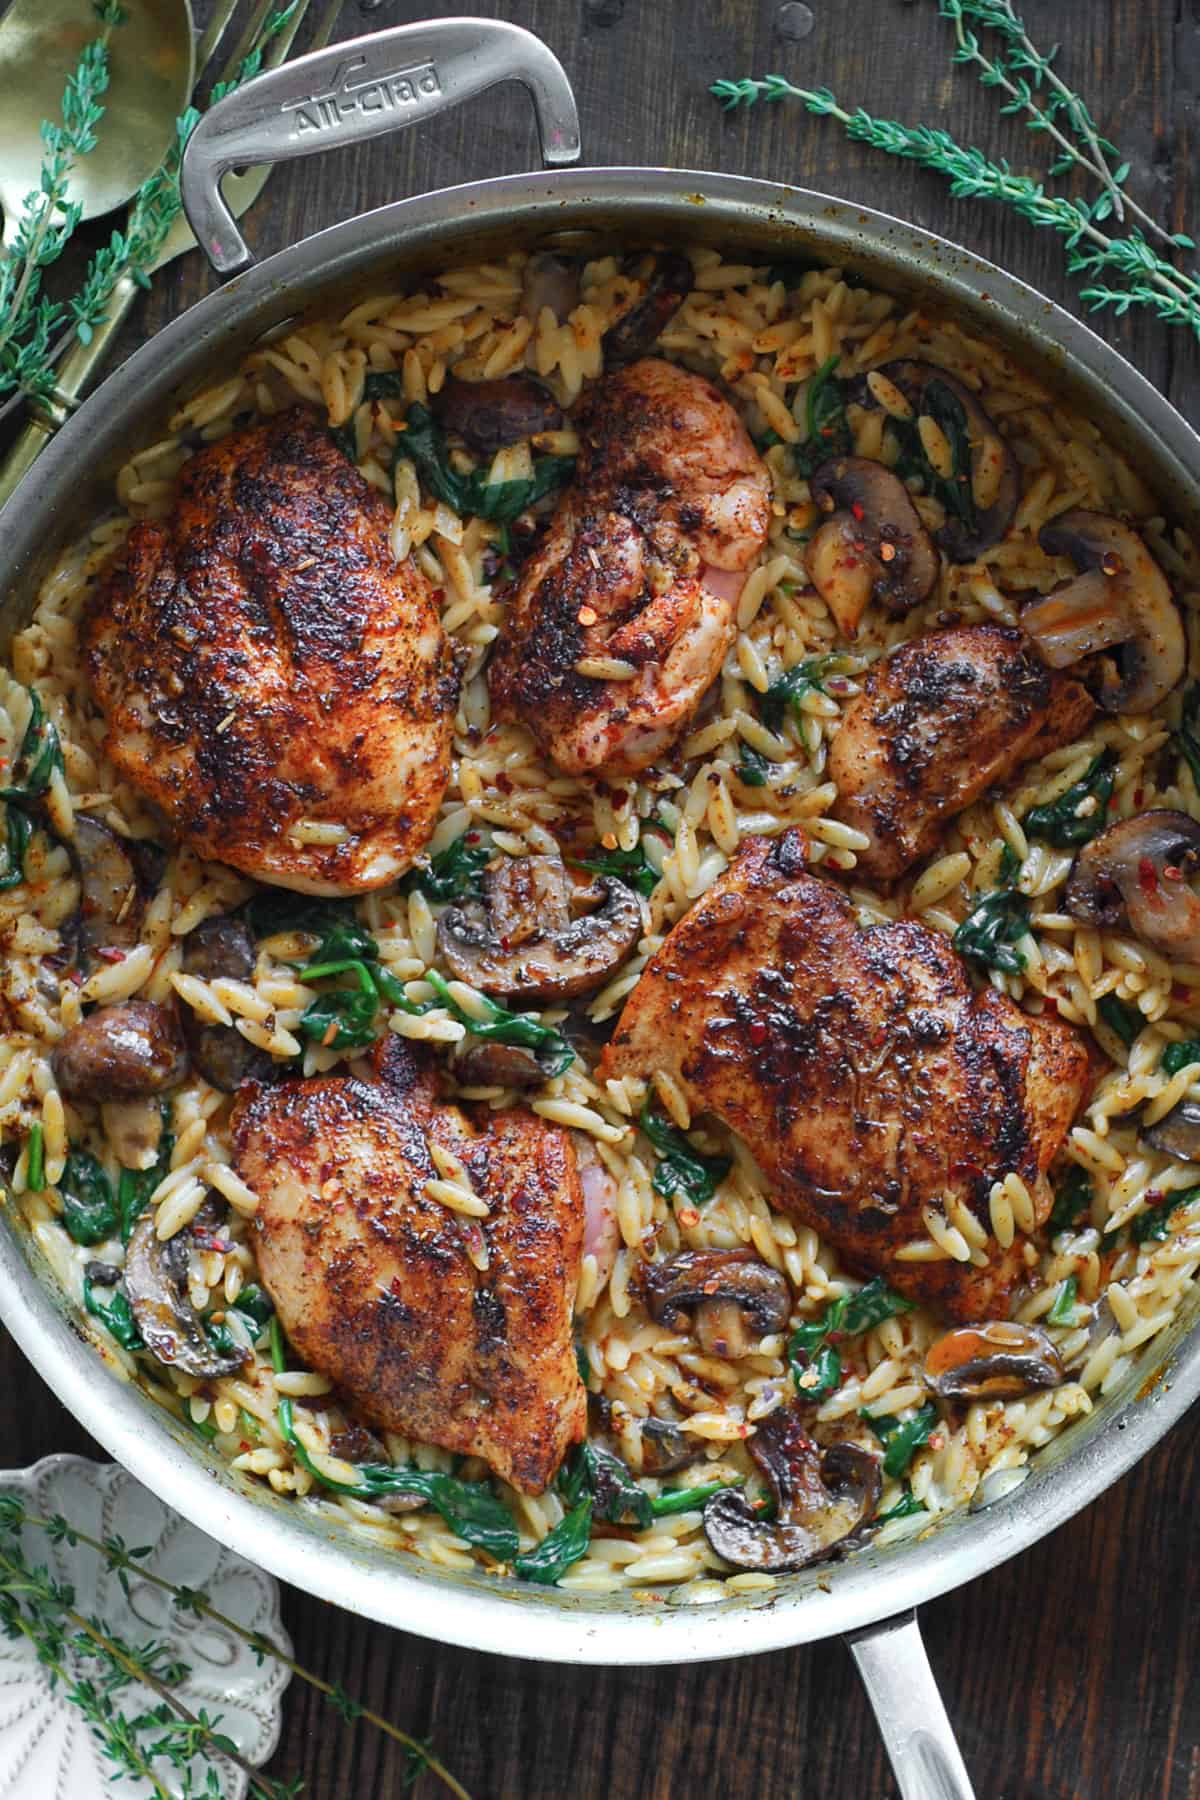 Creamy Yellow Orzo with Mushrooms and Spinach - in a stainless steel pan.